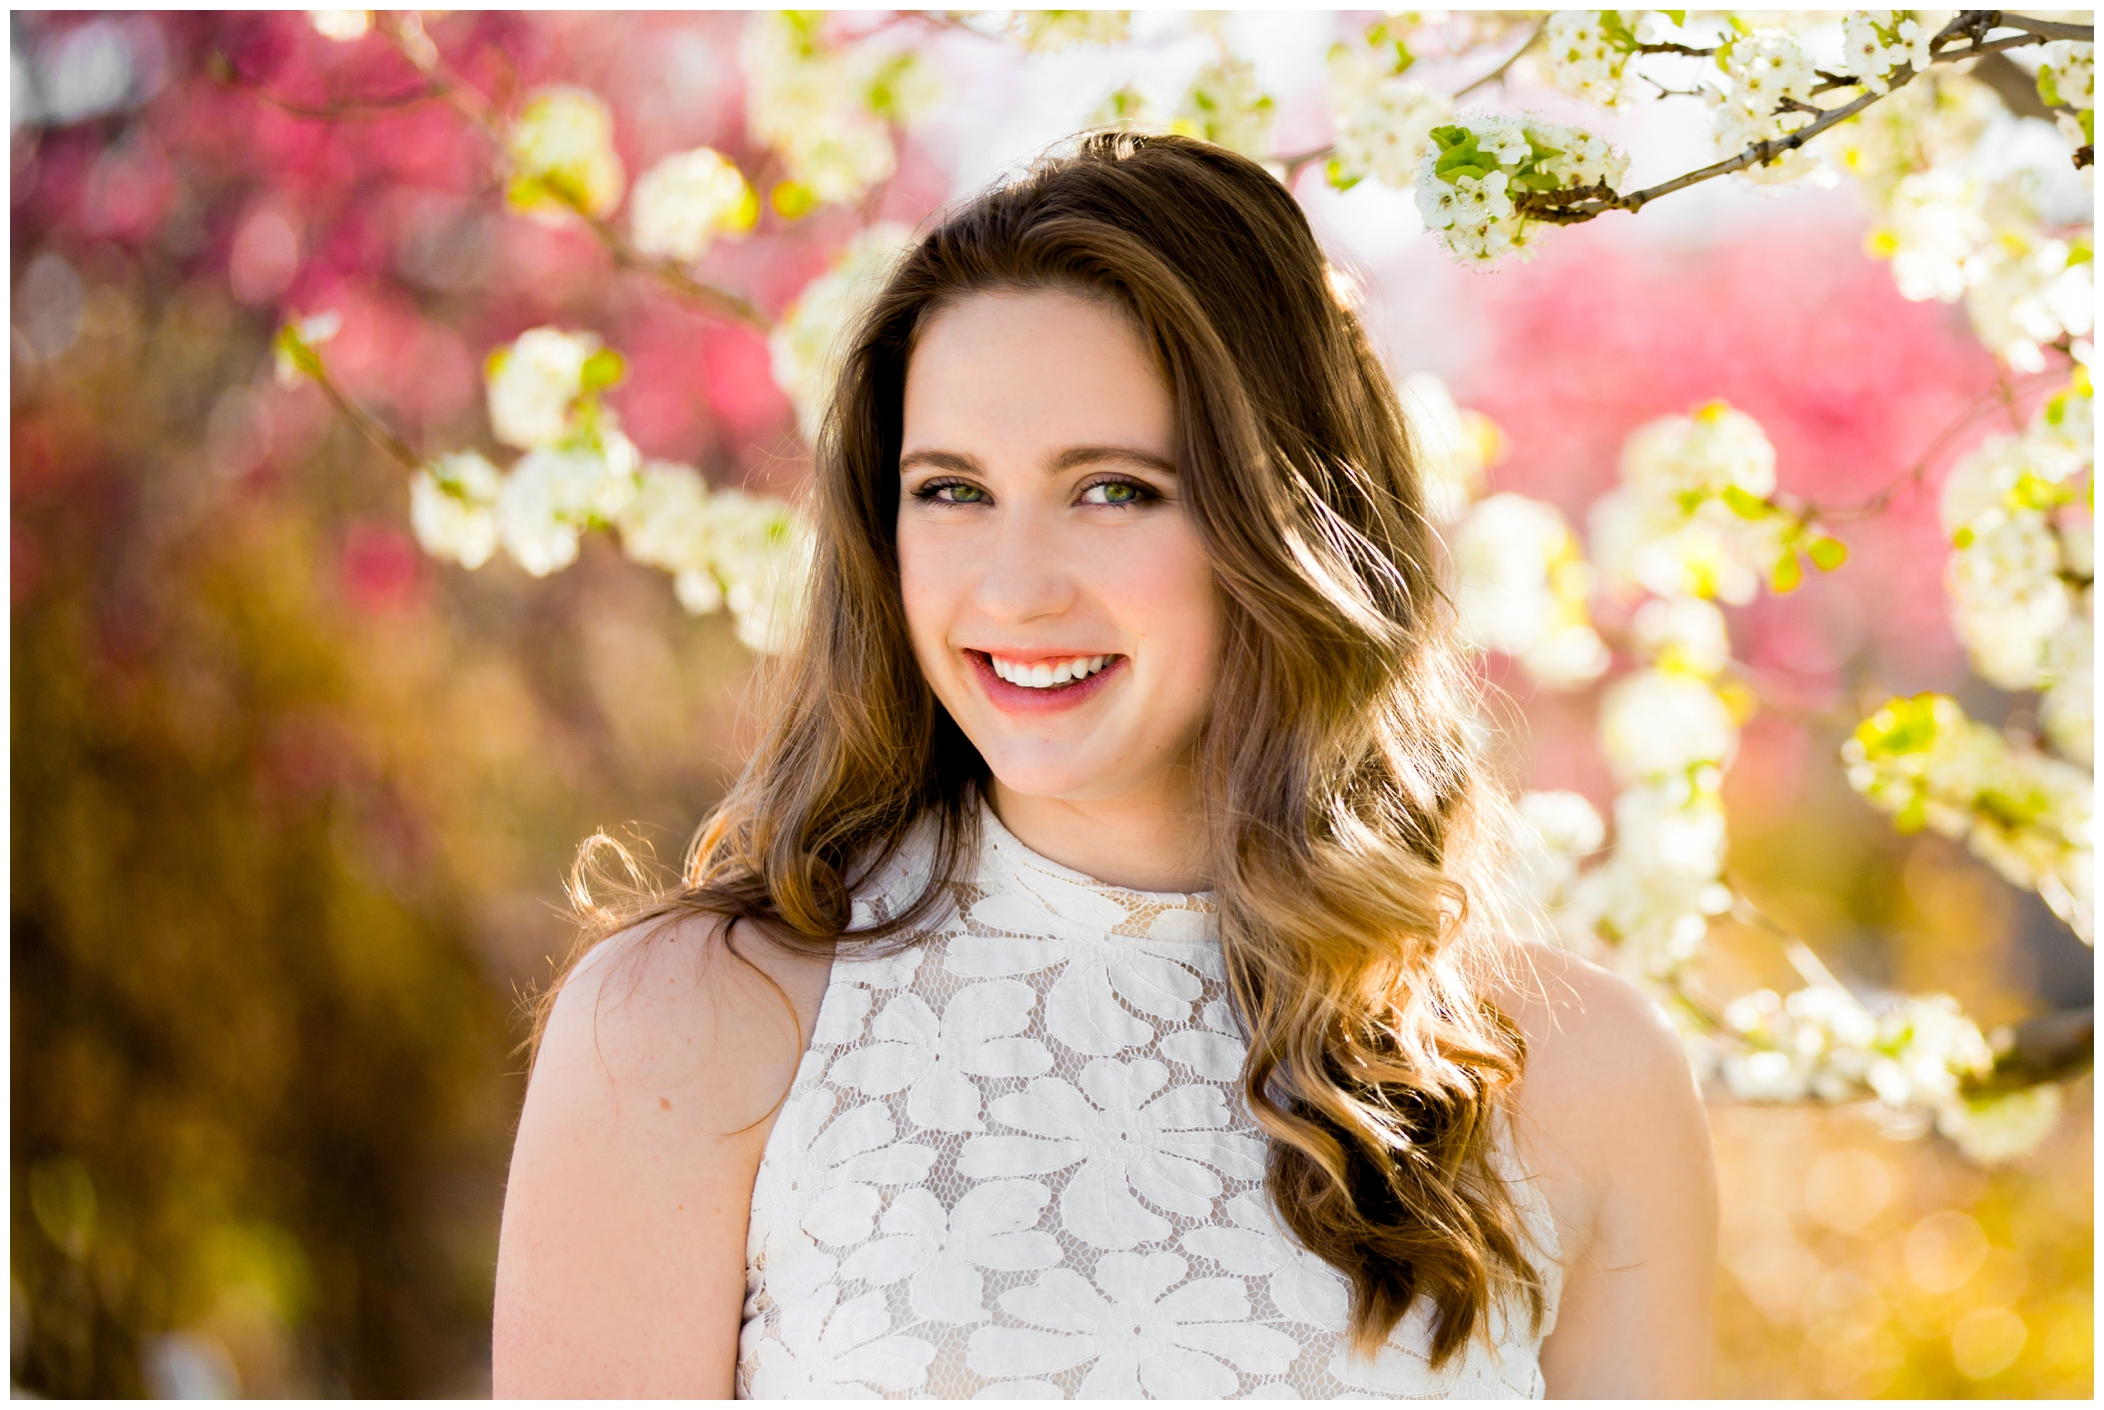 Longmont senior photos with the cherry blossom trees in the background